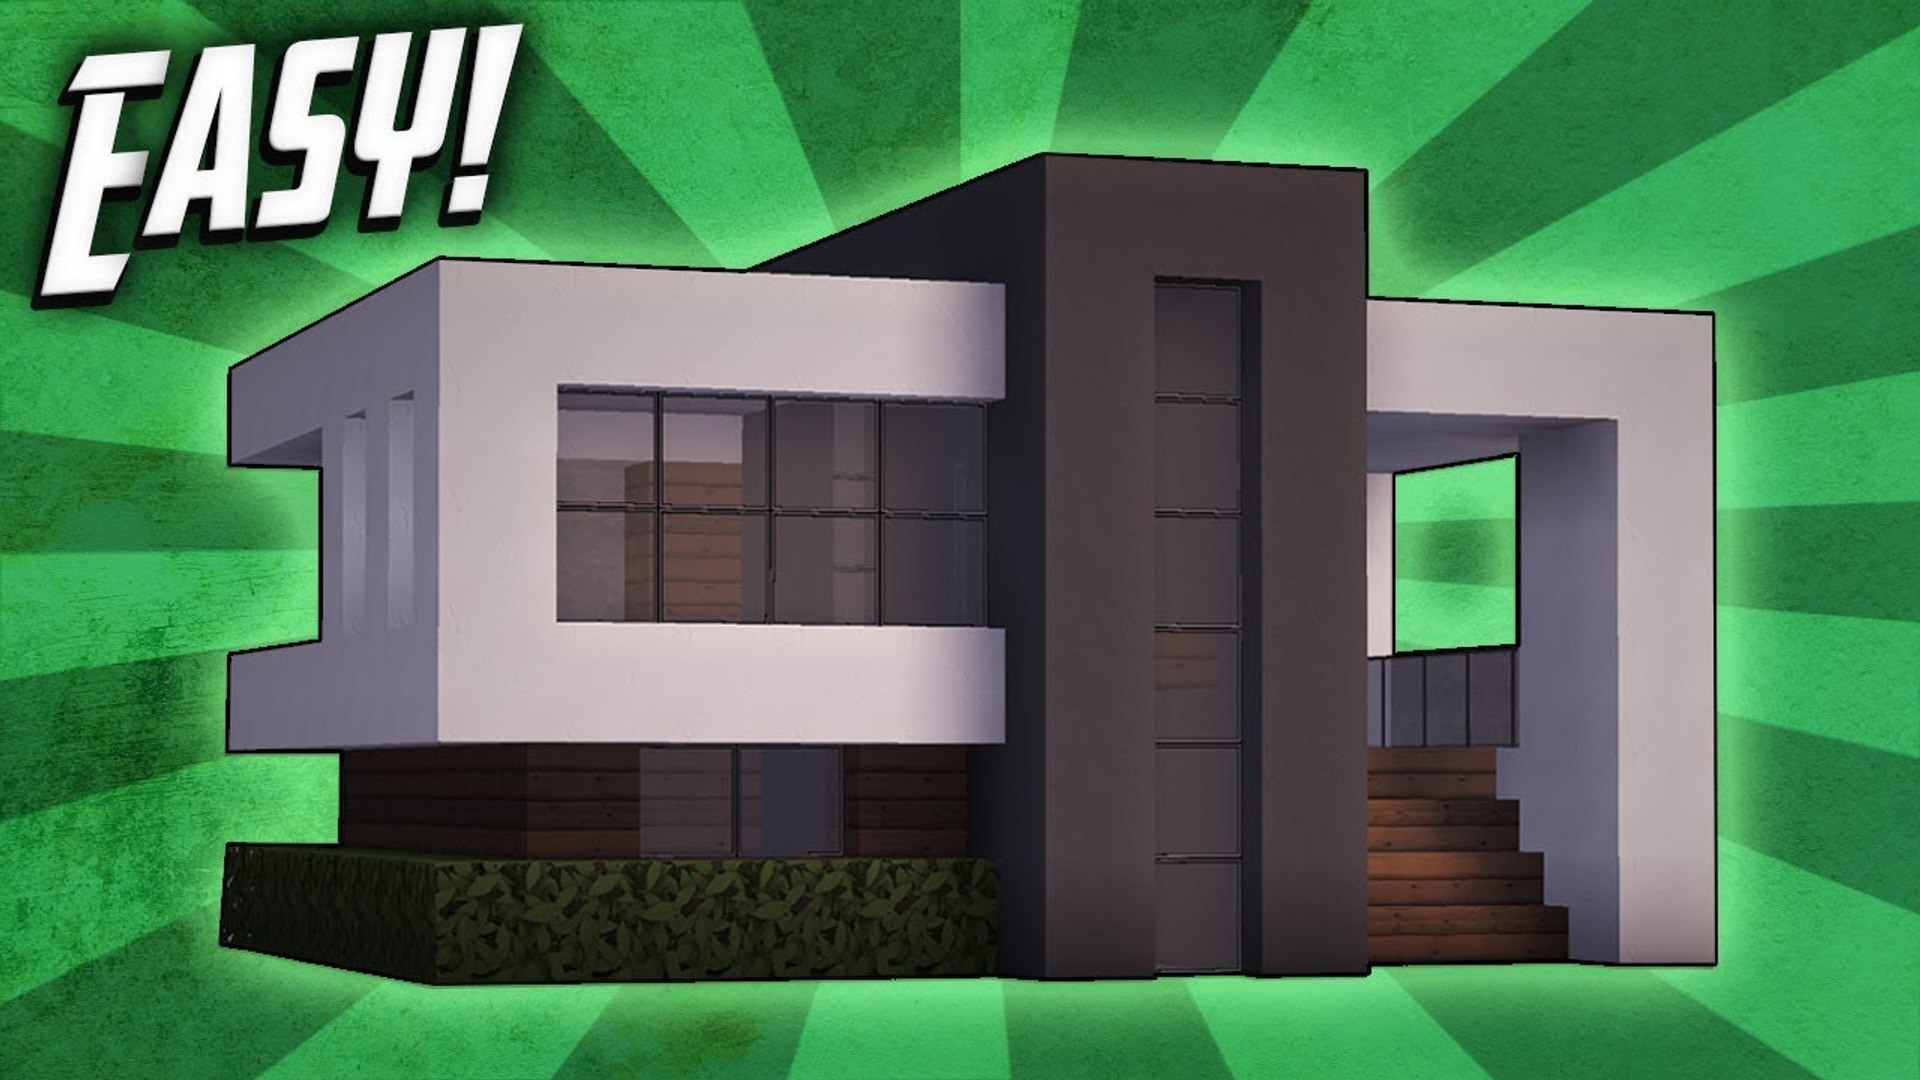 Minecraft: how to build a small & easy modern house tutorial (#25